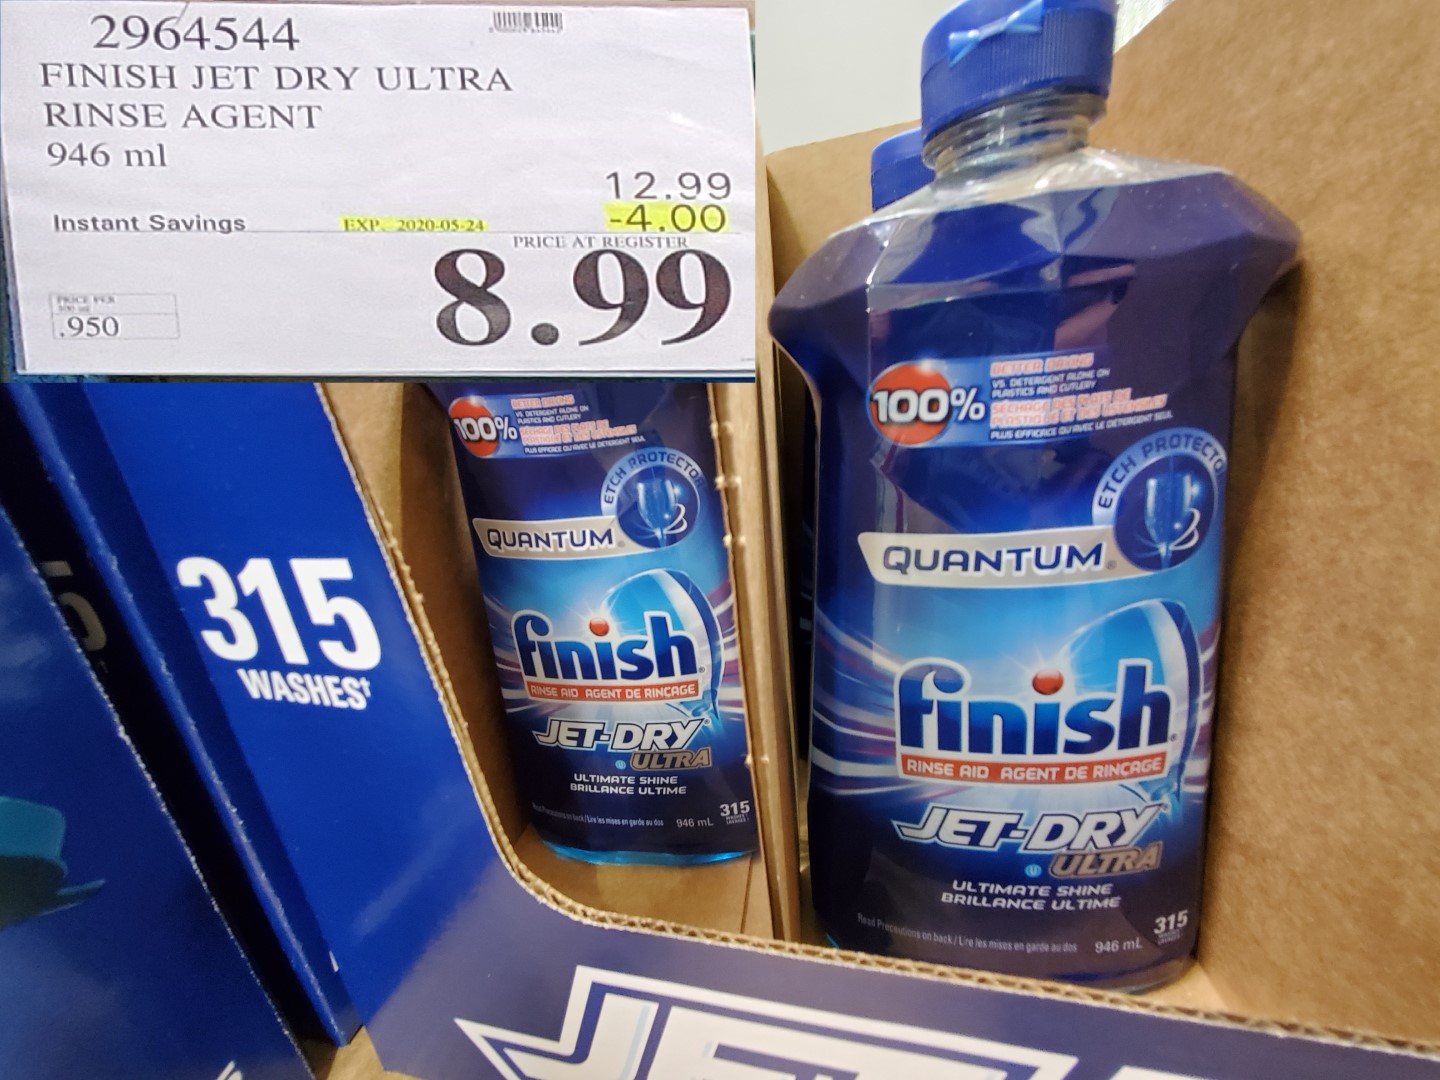 Costco: Hot Deal on Finish Jet-Dry & Max in 1 Dishwashing